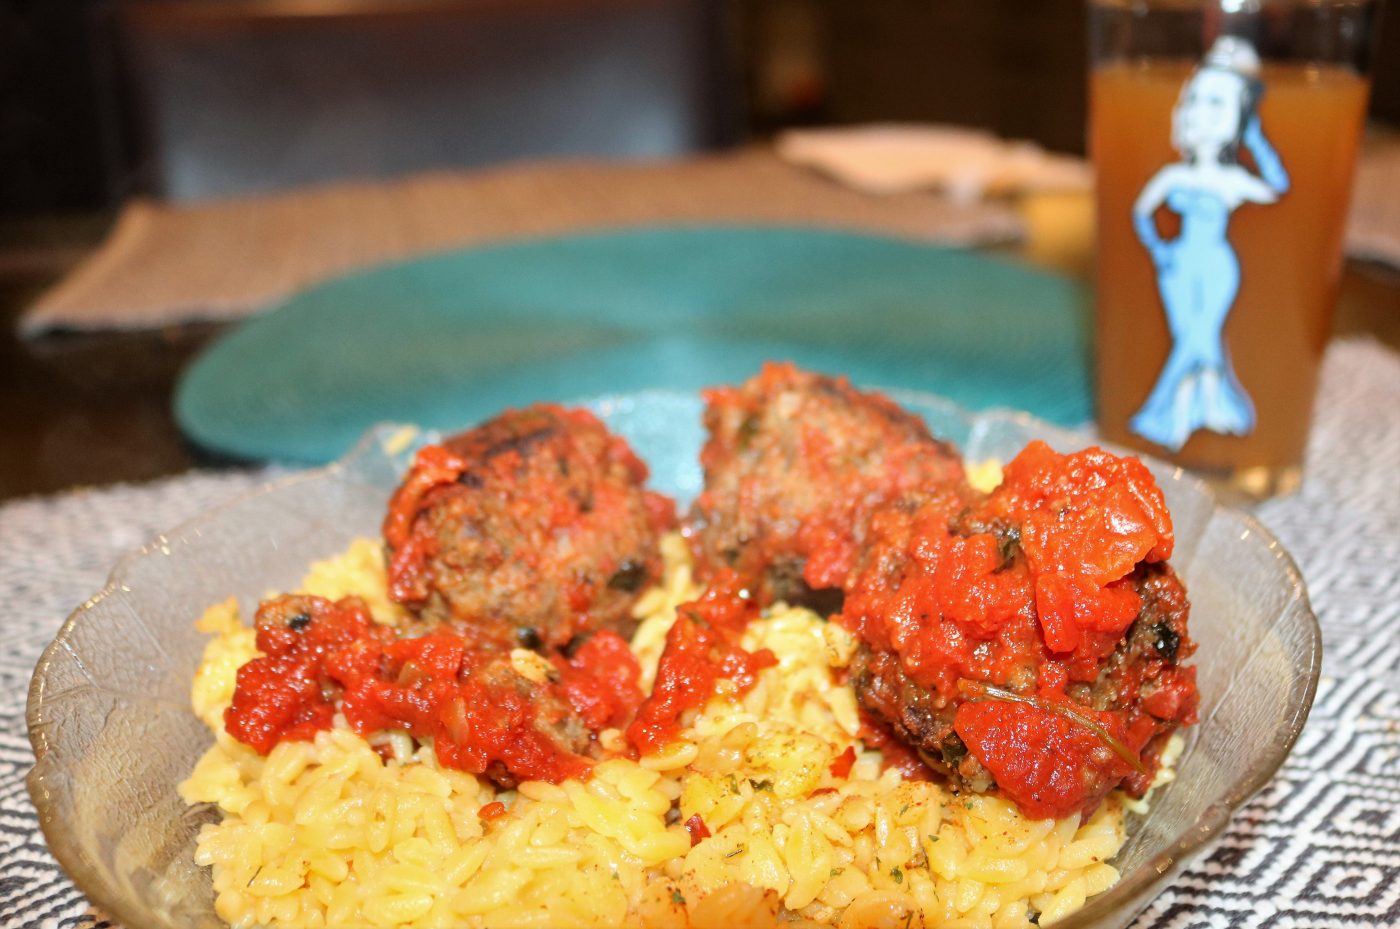 Moroccan meatballs with yellow rice